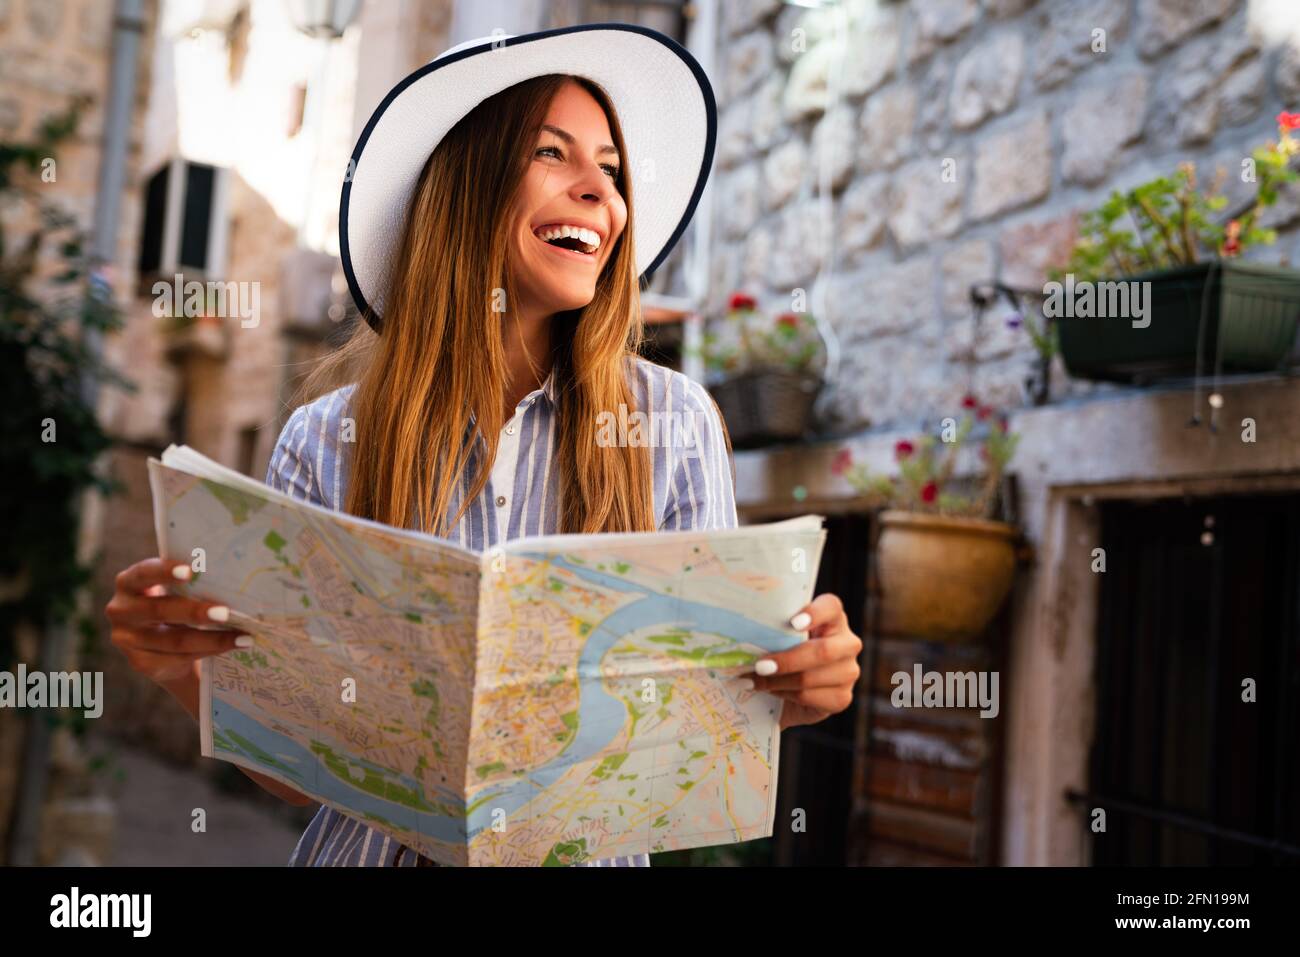 Happy young woman with map in city. Travel tourist people fun concept. Stock Photo